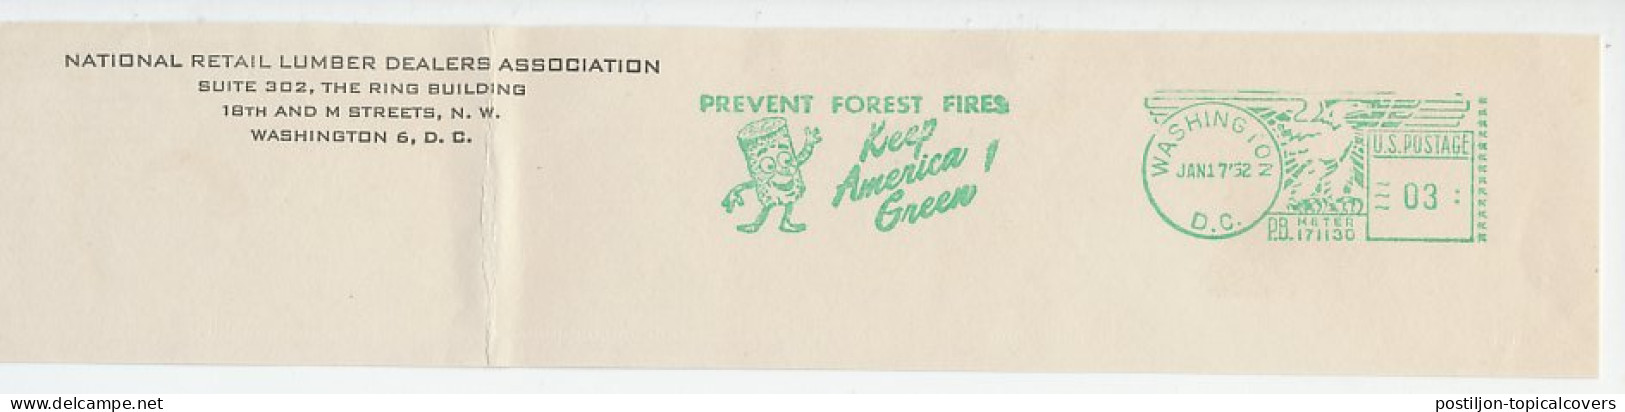 Meter Top Cut USA 1952 Prevent Forest Fires - Sapeurs-Pompiers